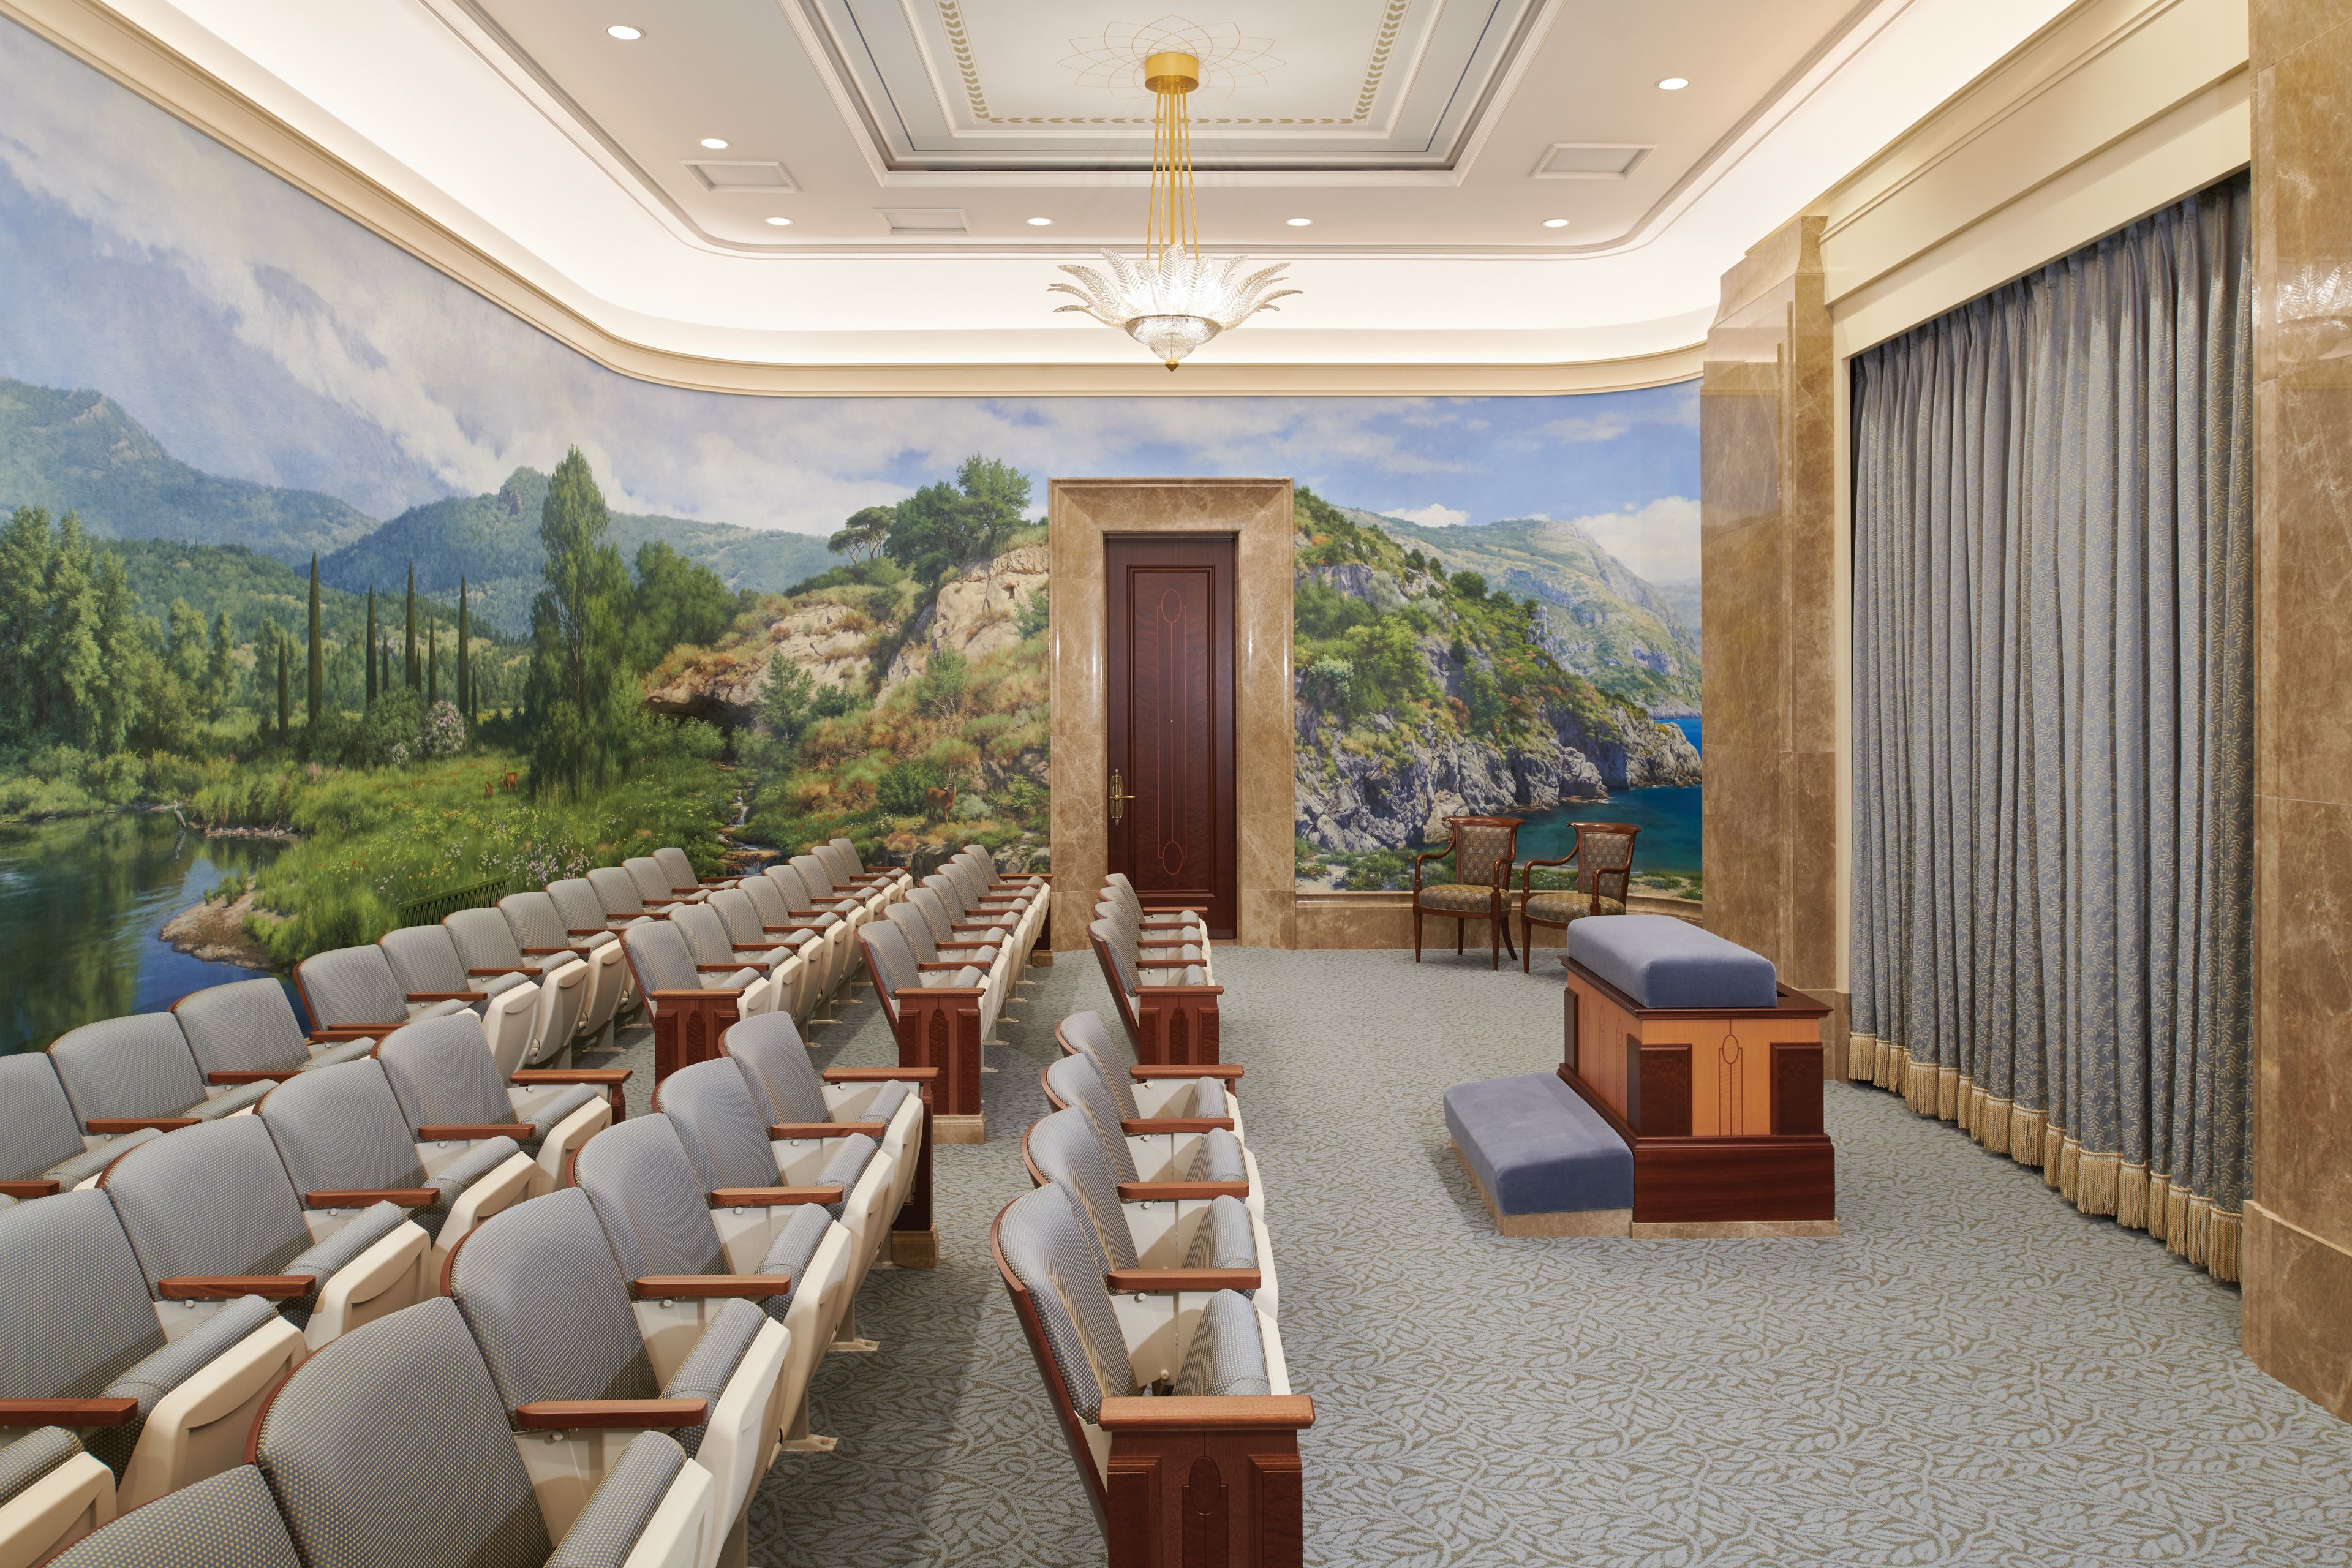 An instruction room in the Rome Italy Temple where patrons make promises with Heavenly Father. The murals on the wall represent the world where we now live.